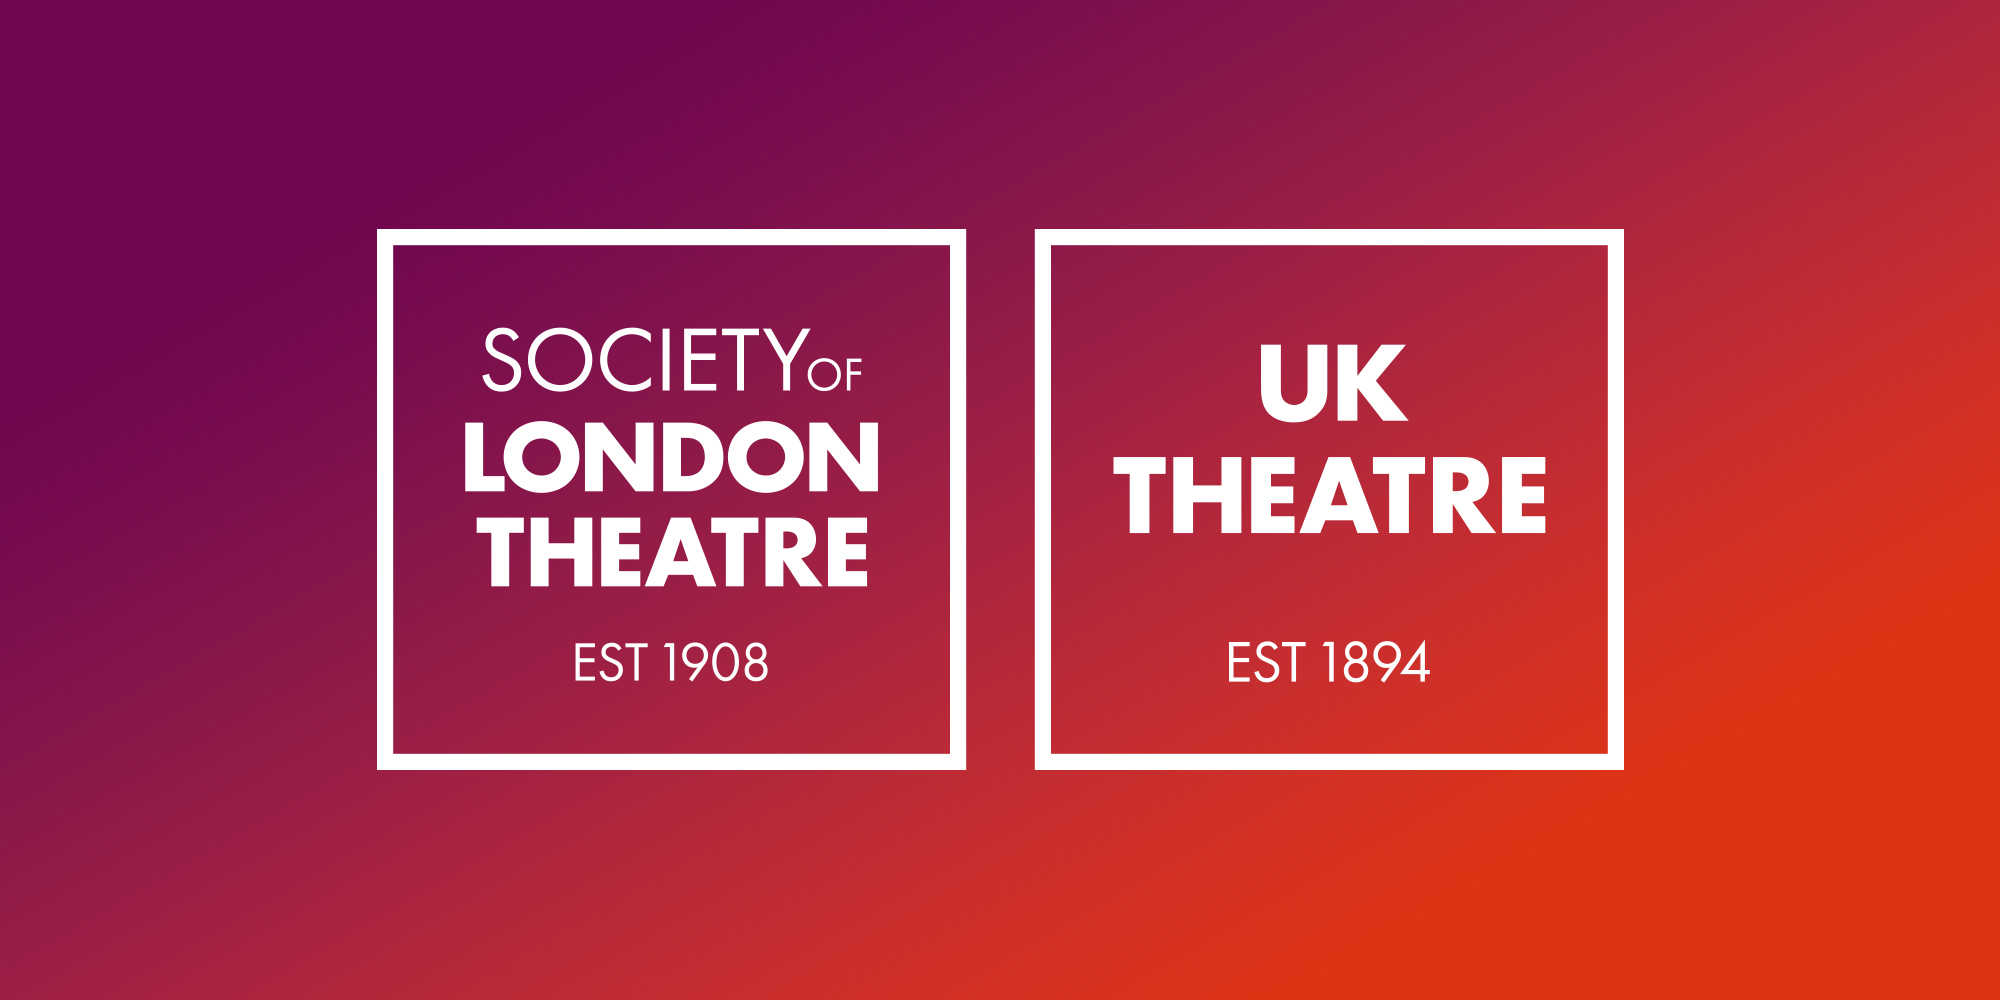 Congratulations to UK Theatre members who co-produced Olivier Award nominated productions